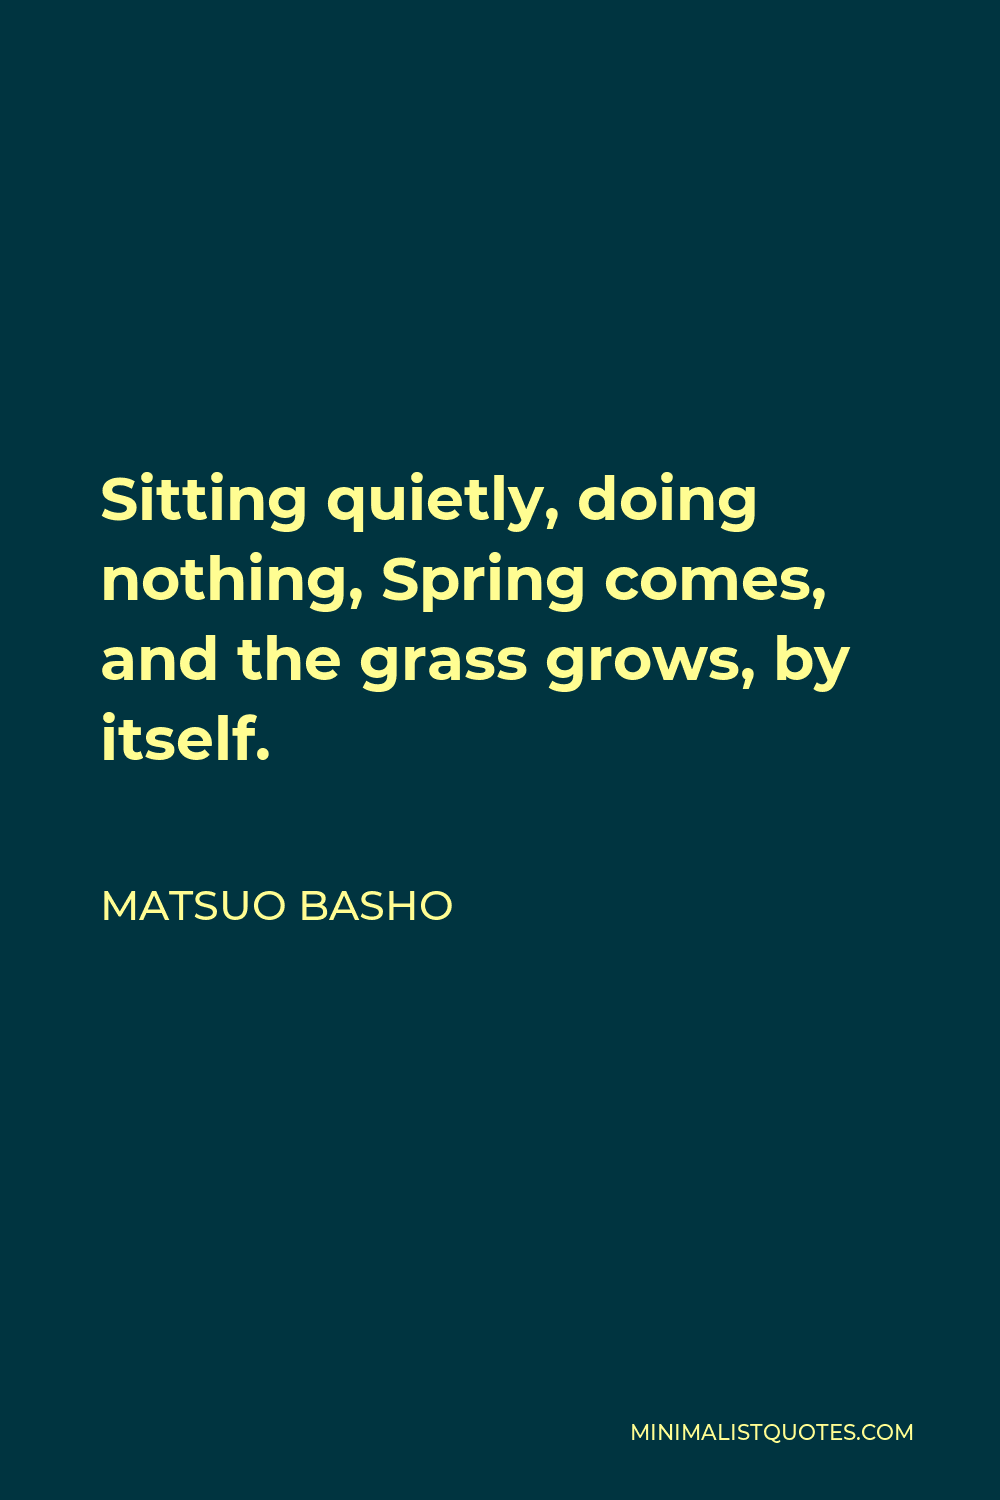 Matsuo Basho Quote - Sitting quietly, doing nothing, Spring comes, and the grass grows, by itself.